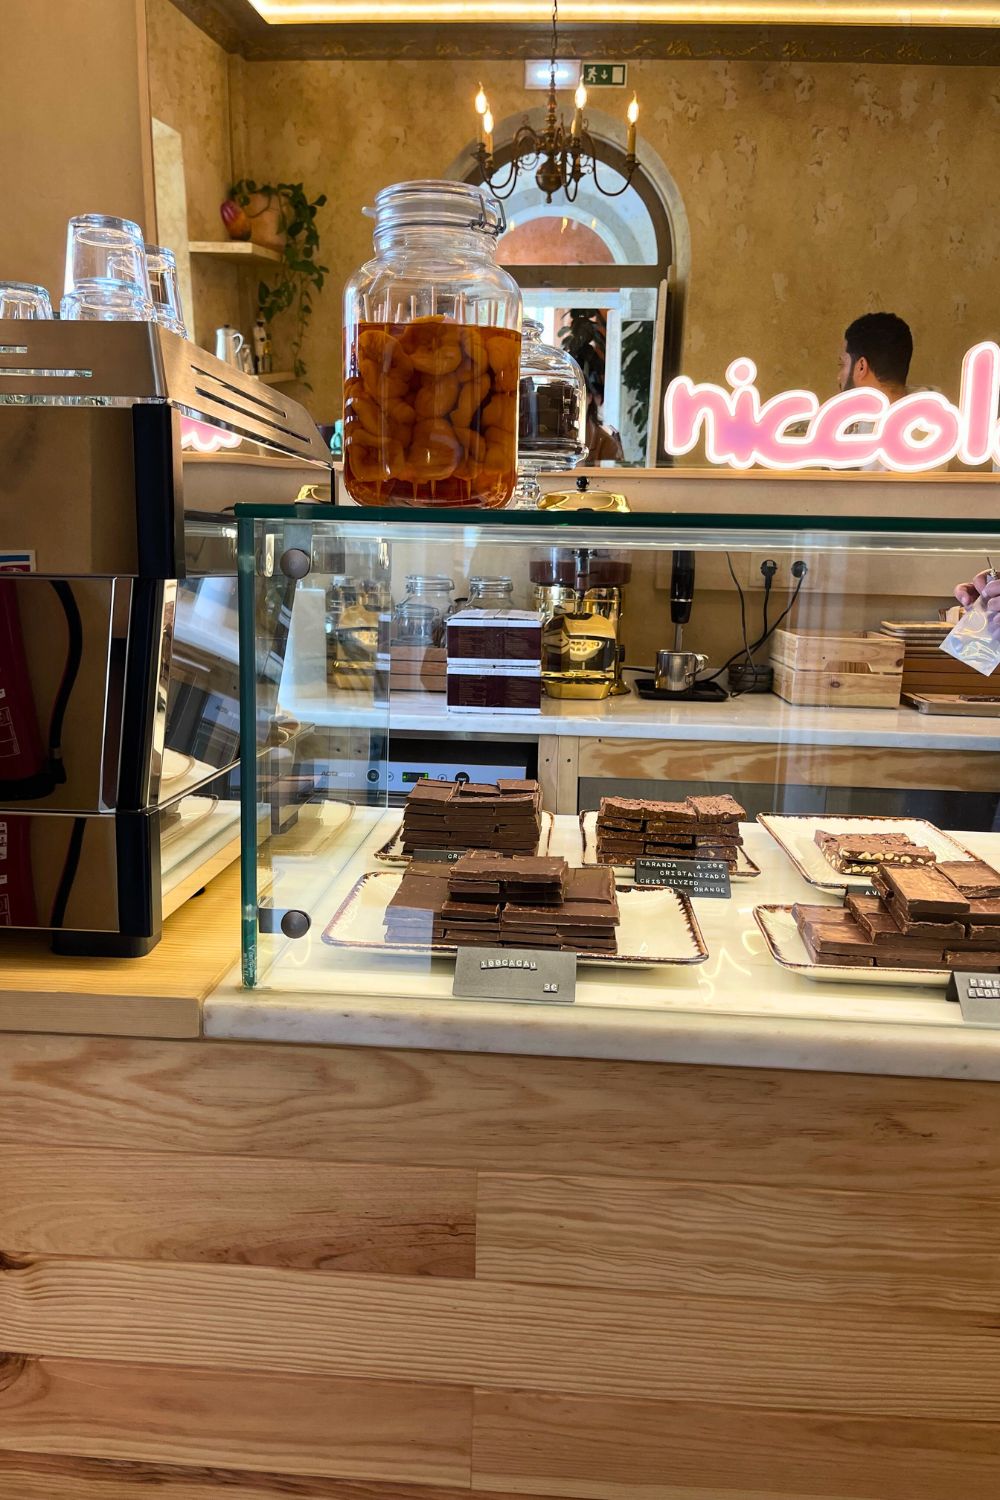 The interior of Niccolò café showcases a selection of fine chocolate bars neatly presented in a glass display case, with warm lighting and a stylish neon sign reflecting in the mirror, creating a cozy and upscale atmosphere for chocolate enthusiasts.